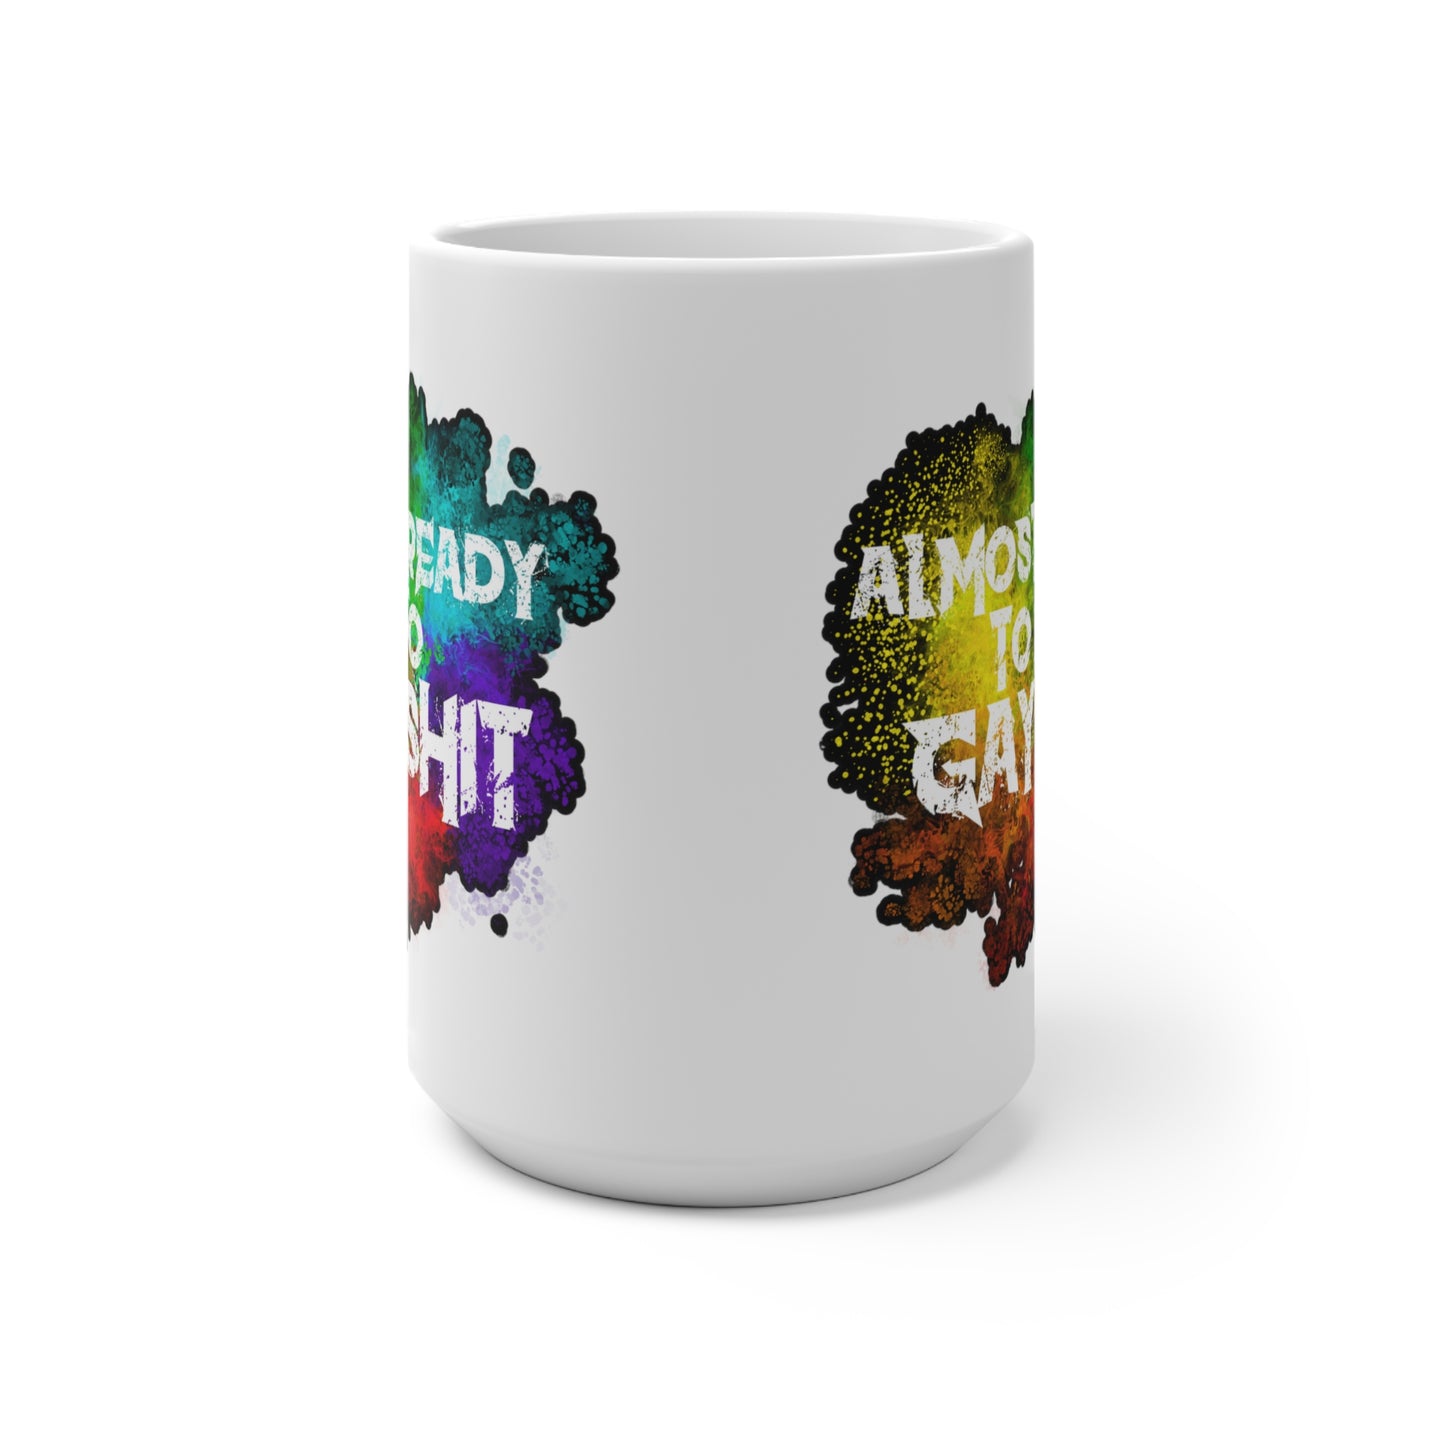 Get your hands on the 11oz color-changing mug by Moody Booty Apparel - 'Almost Ready To Do Gay Shit.' A vibrant LGBTQ pride-themed coffee mug that transforms colors when hot liquid is poured. Perfect for expressing pride and inclusivity.